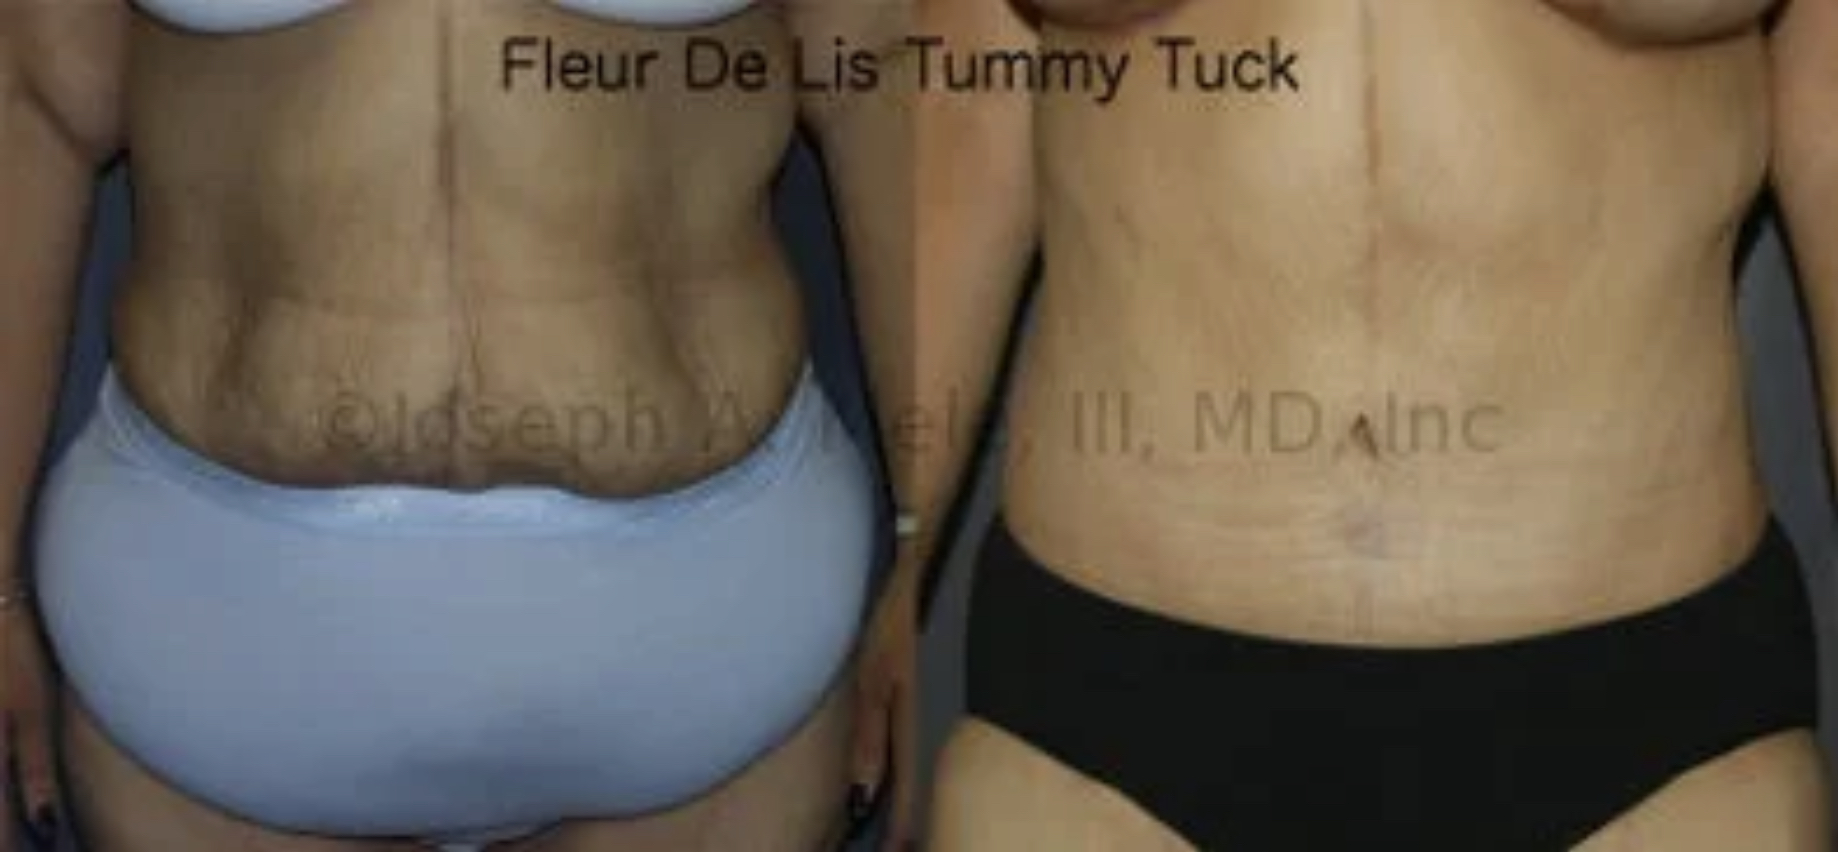 Fleur-de-Lis Abdominoplasty before and after Tummy Tuck post bariatric surgery